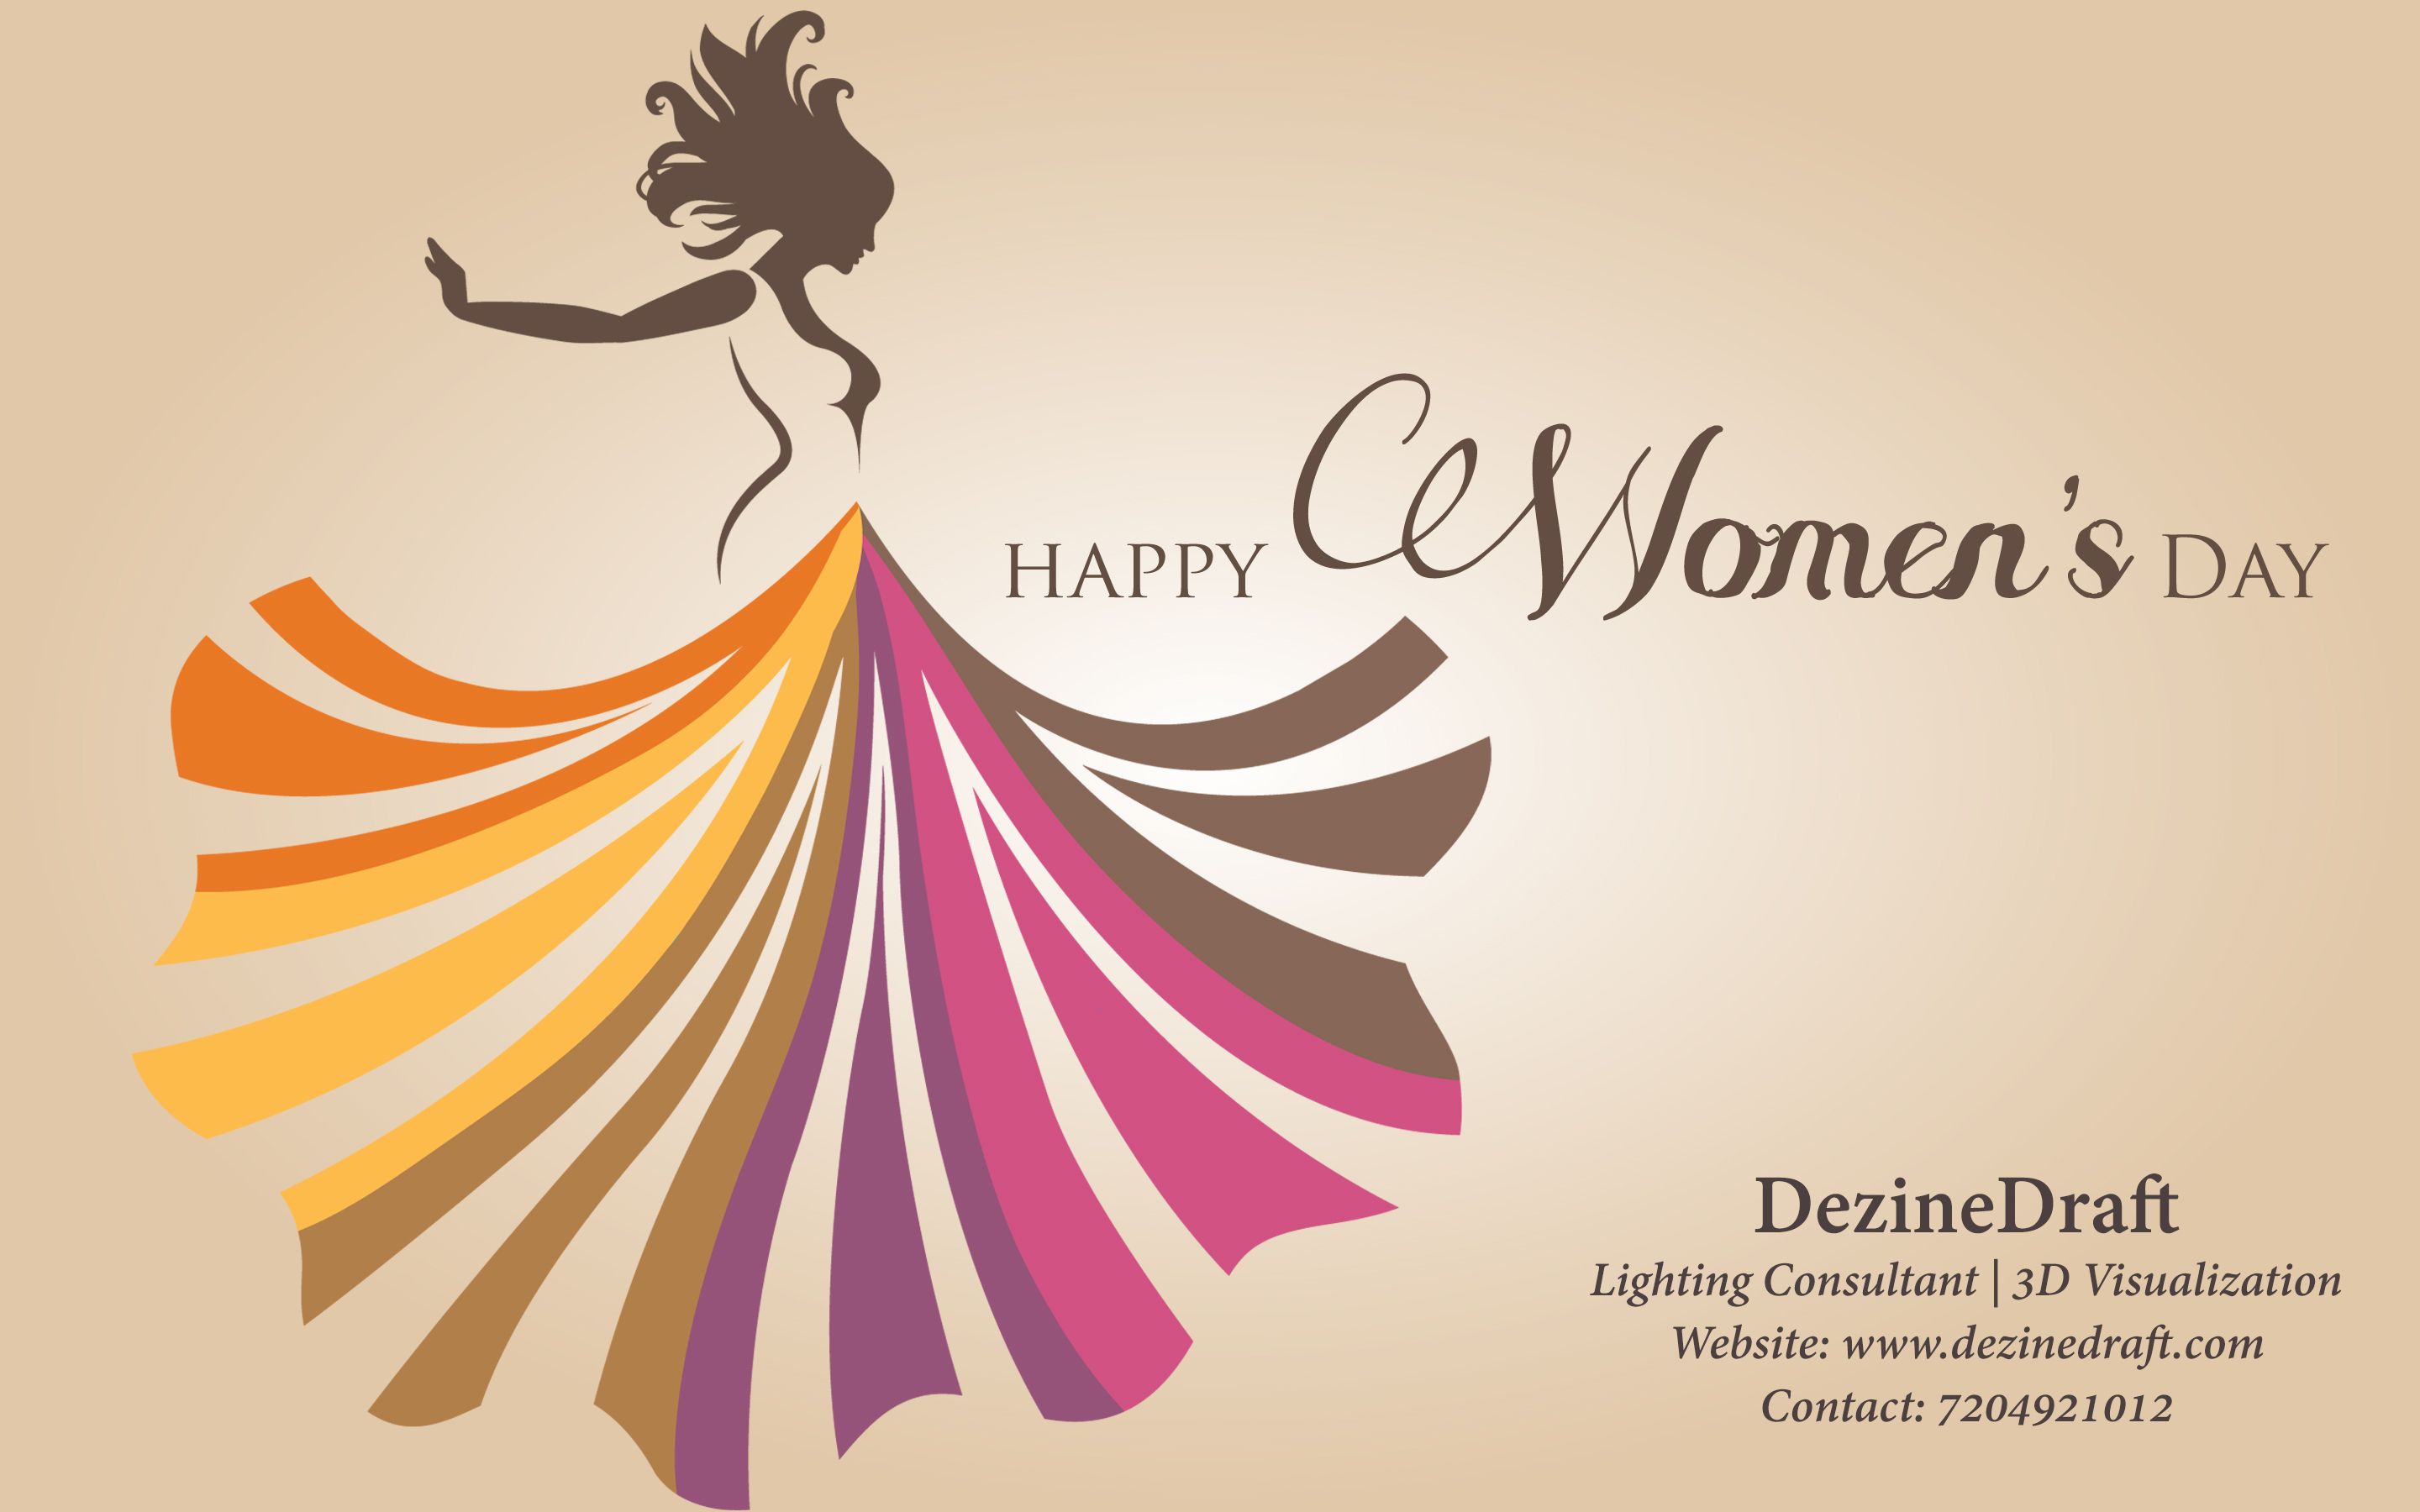 Let's dedicate this day to all the women and celebrate International Women's Day.!